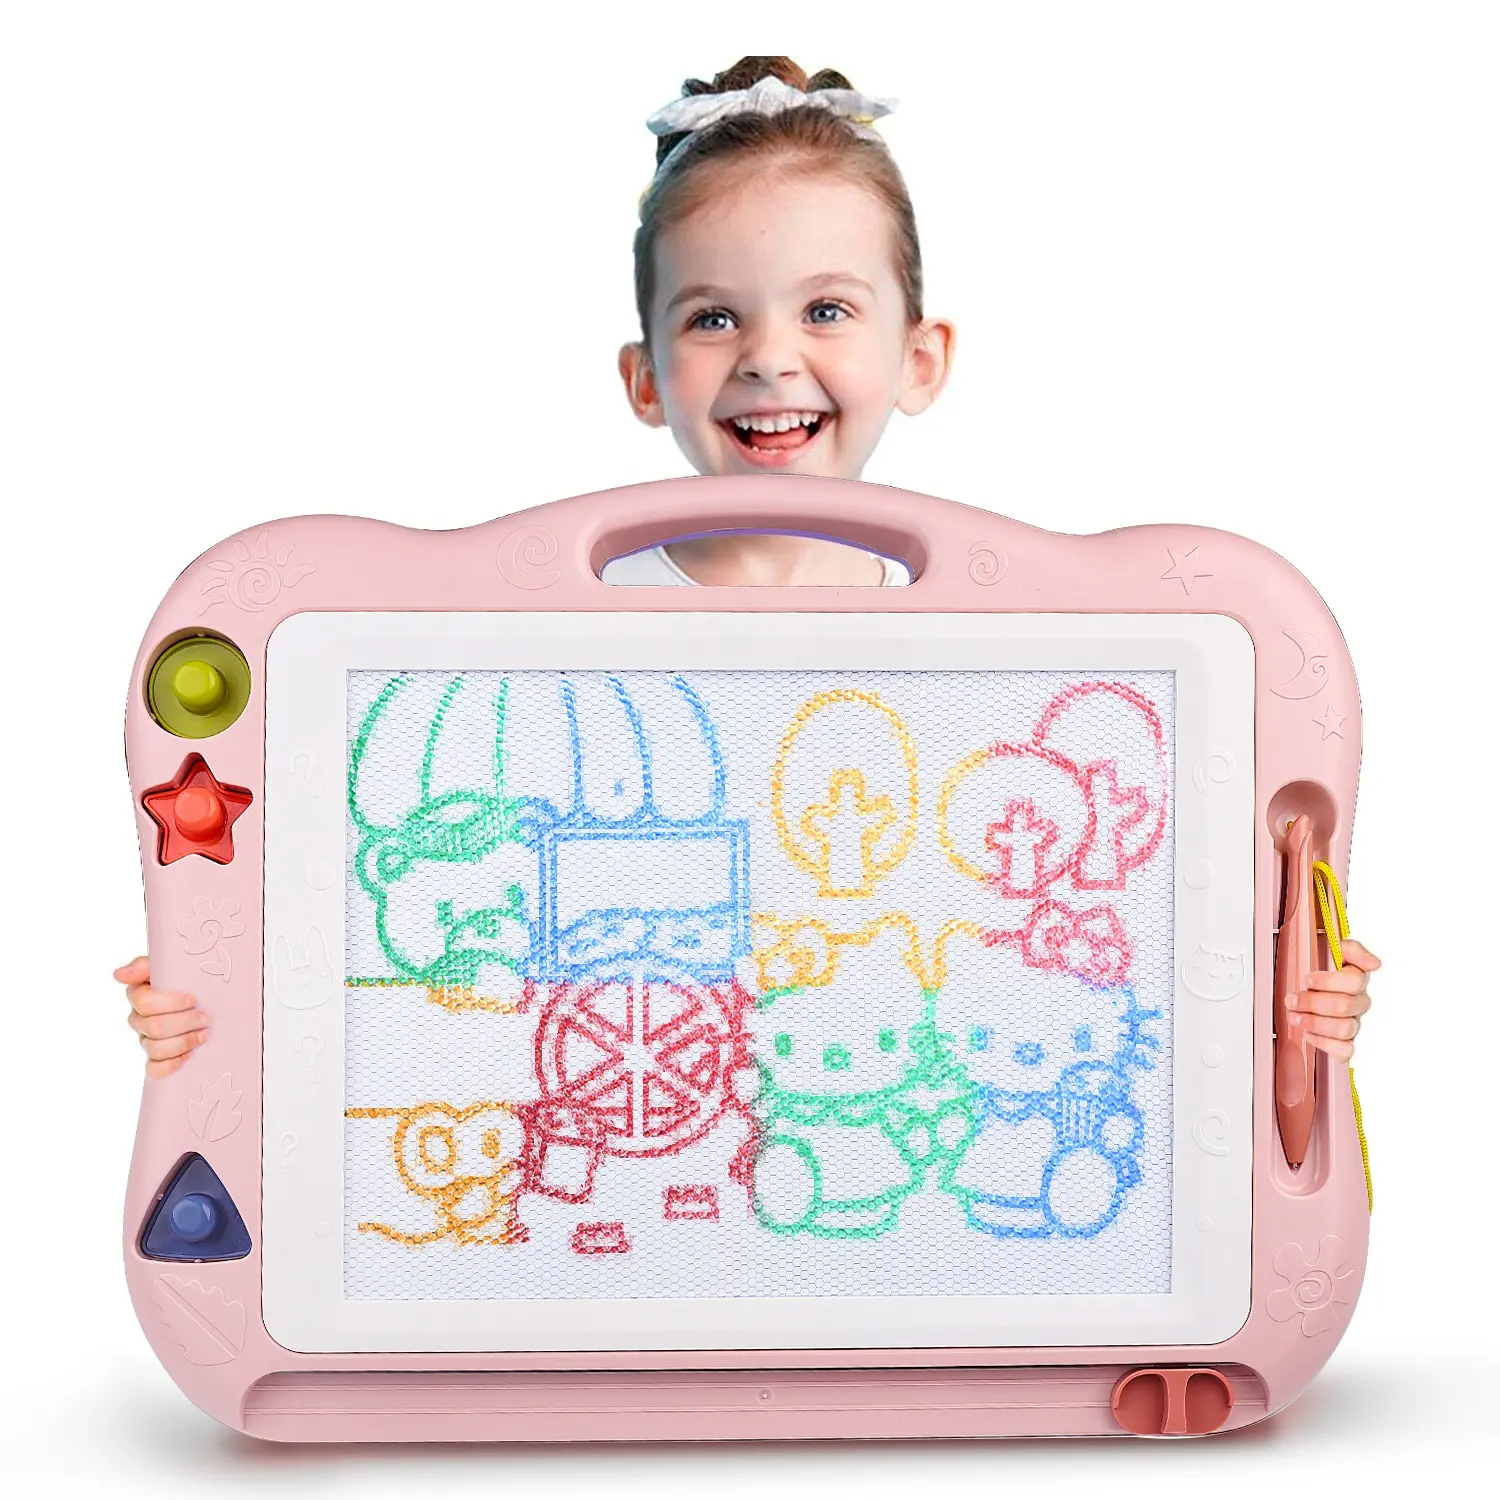 Drawing Board 2020 Top Hot Kids Magnetic Drawing Board with Holder Graffiti Painting Board Educational Toys